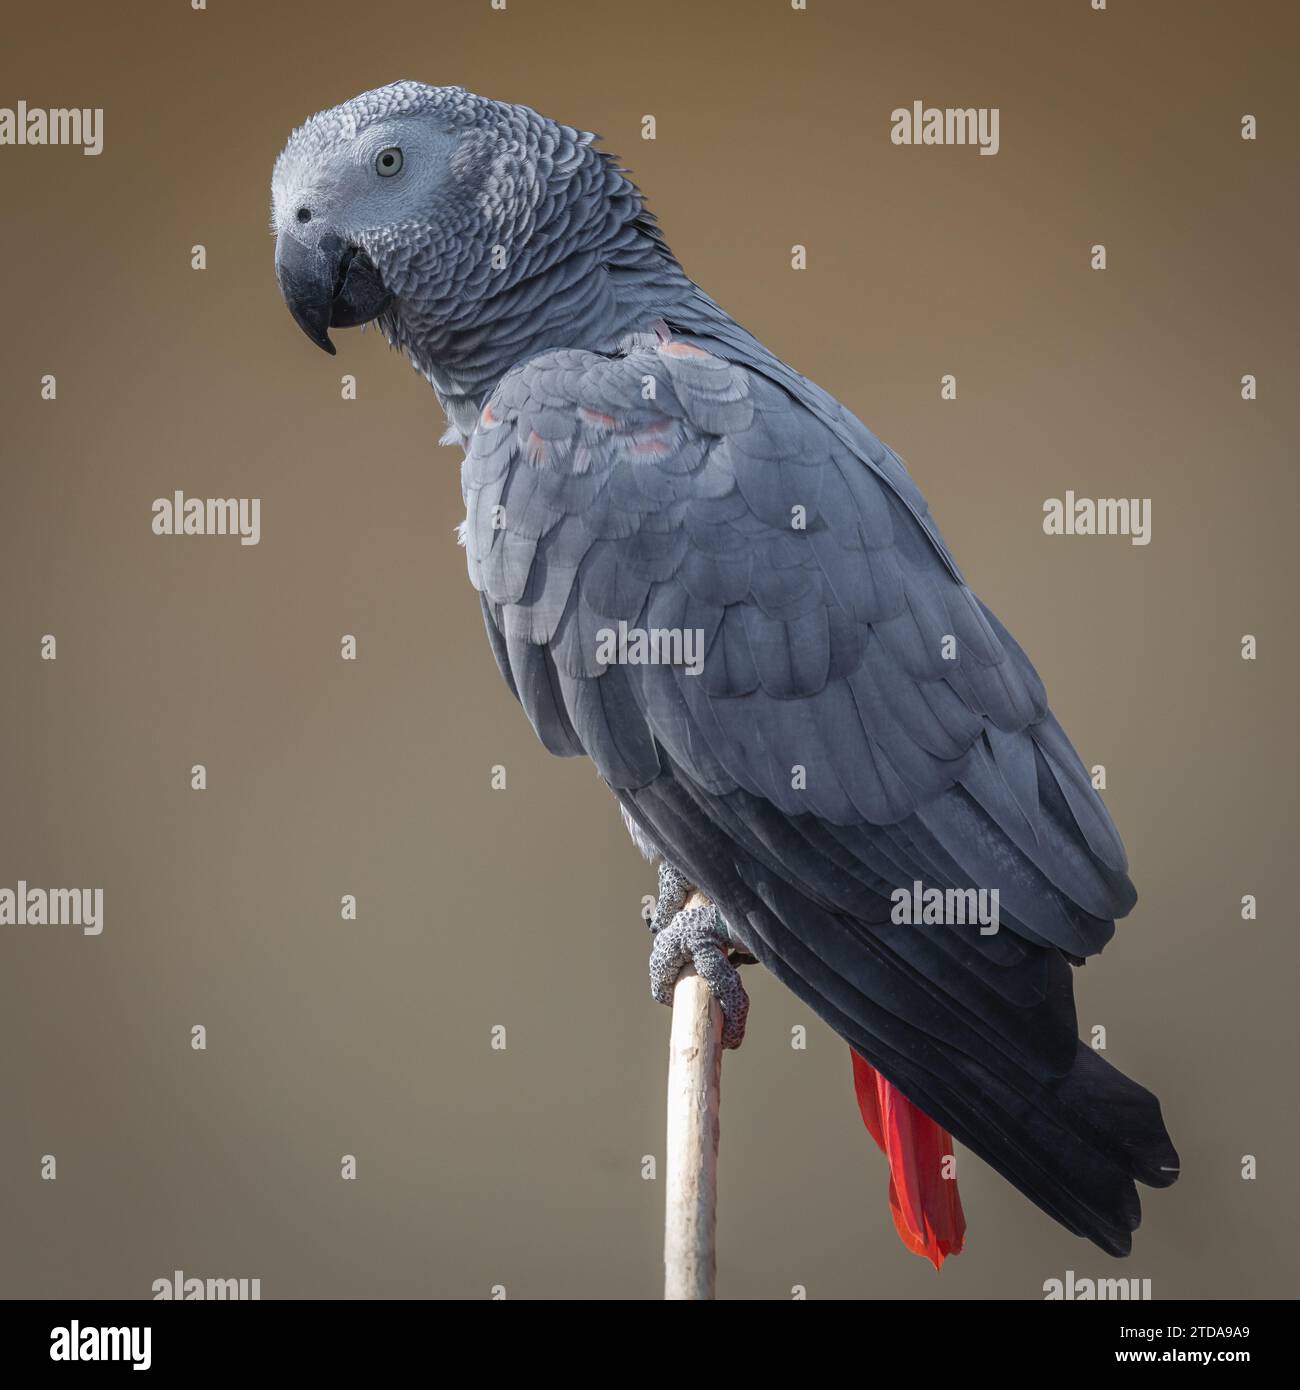 a close up full length portrait of an african grey parrot. Taken against a plain neutral background with space for text Stock Photo